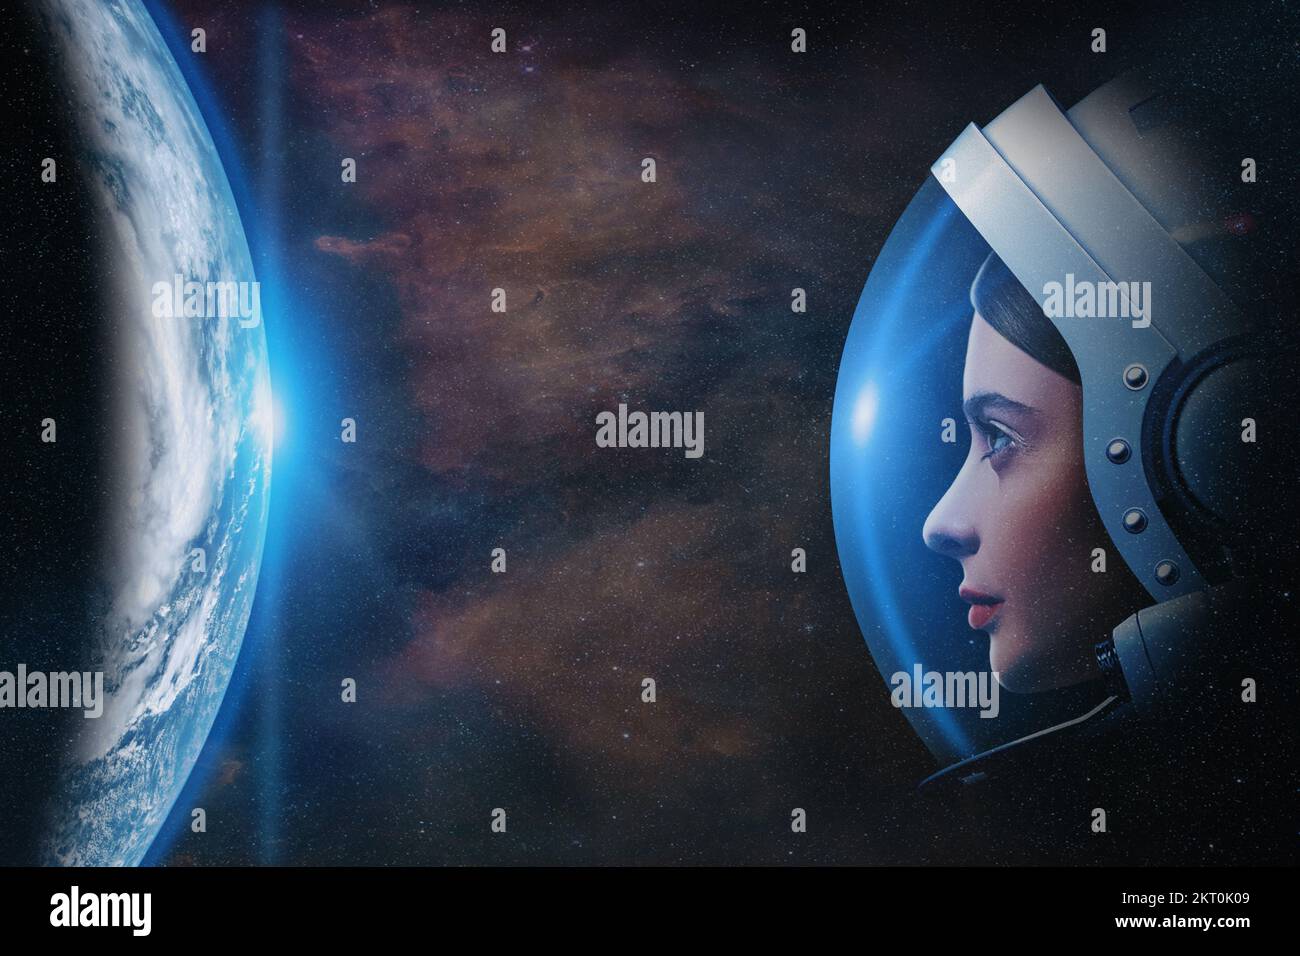 Attractive woman astronaut against Earth planet in outer space. Elements of this image furnished by NASA. Stock Photo